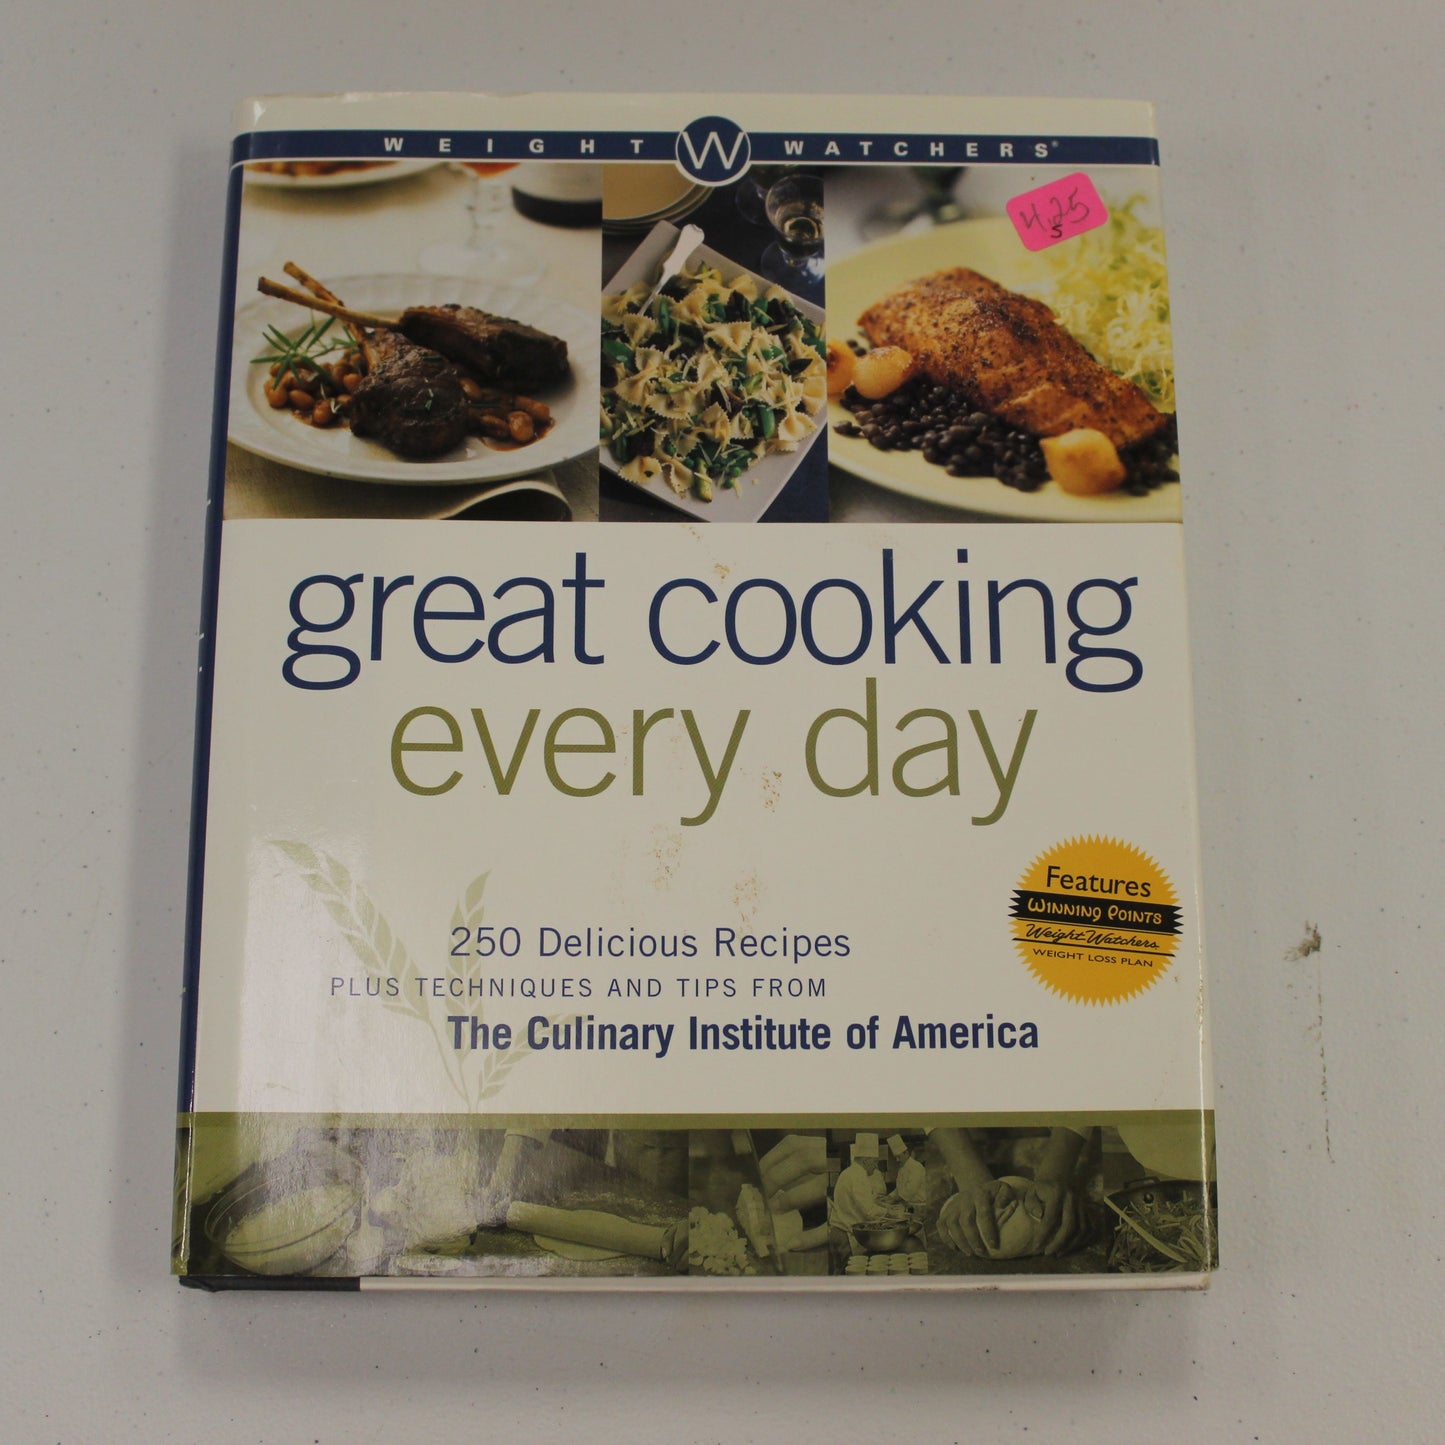 WEIGHT WATCHERS: GREAT COOKING EVERY DAY